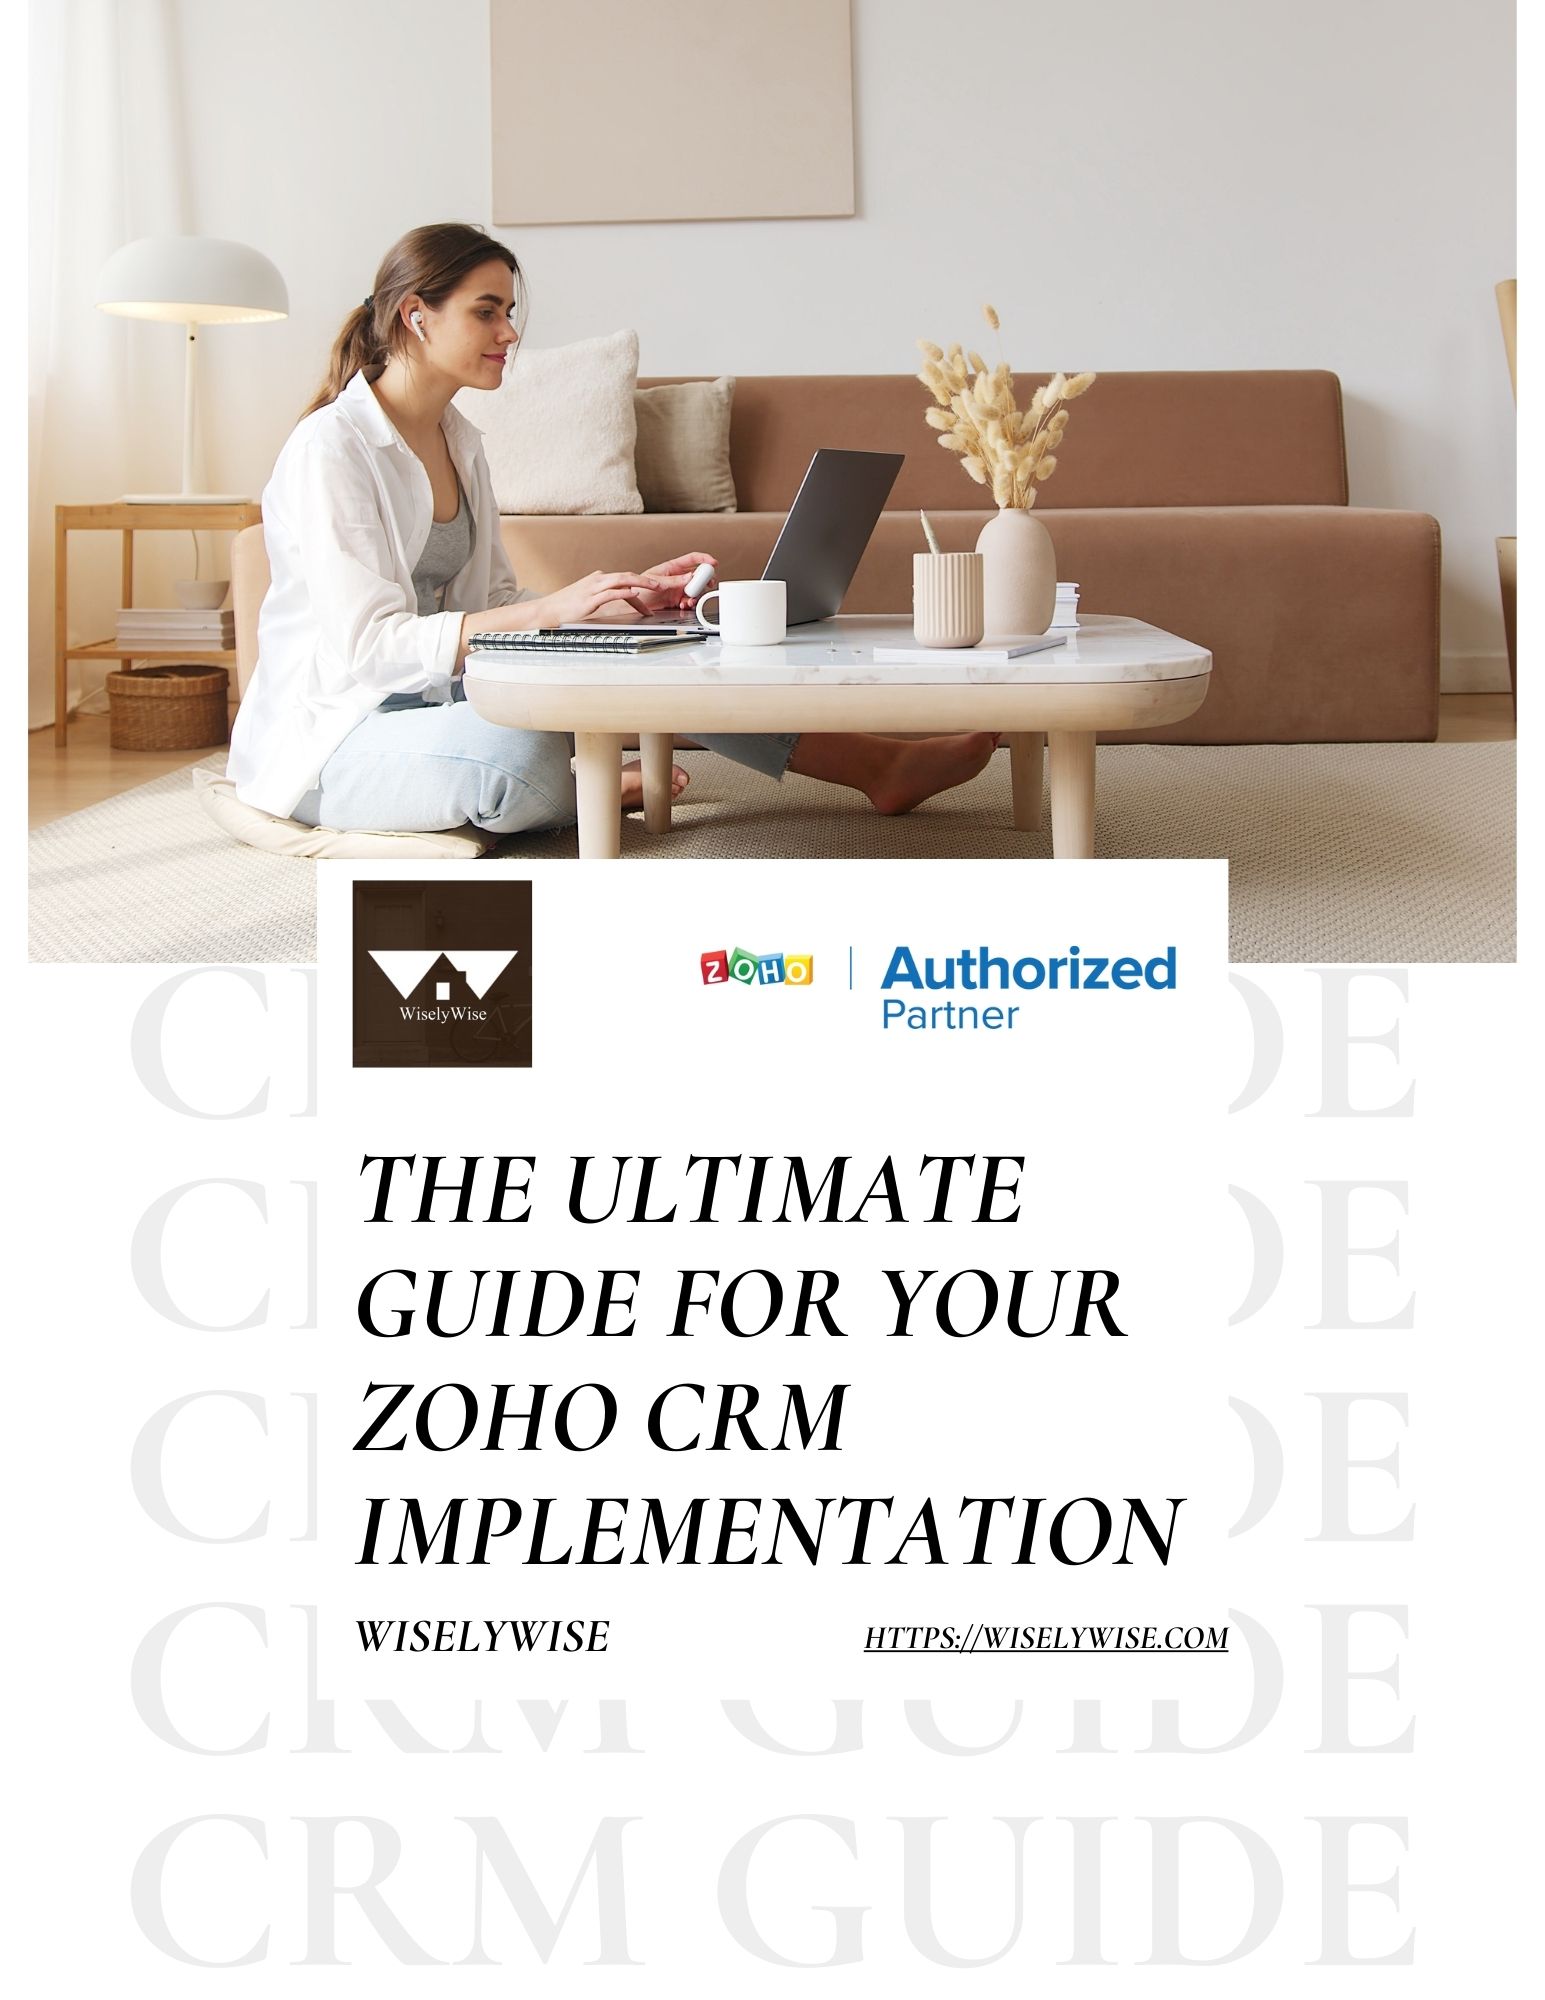 zoho crm implementation guide by wiselywise